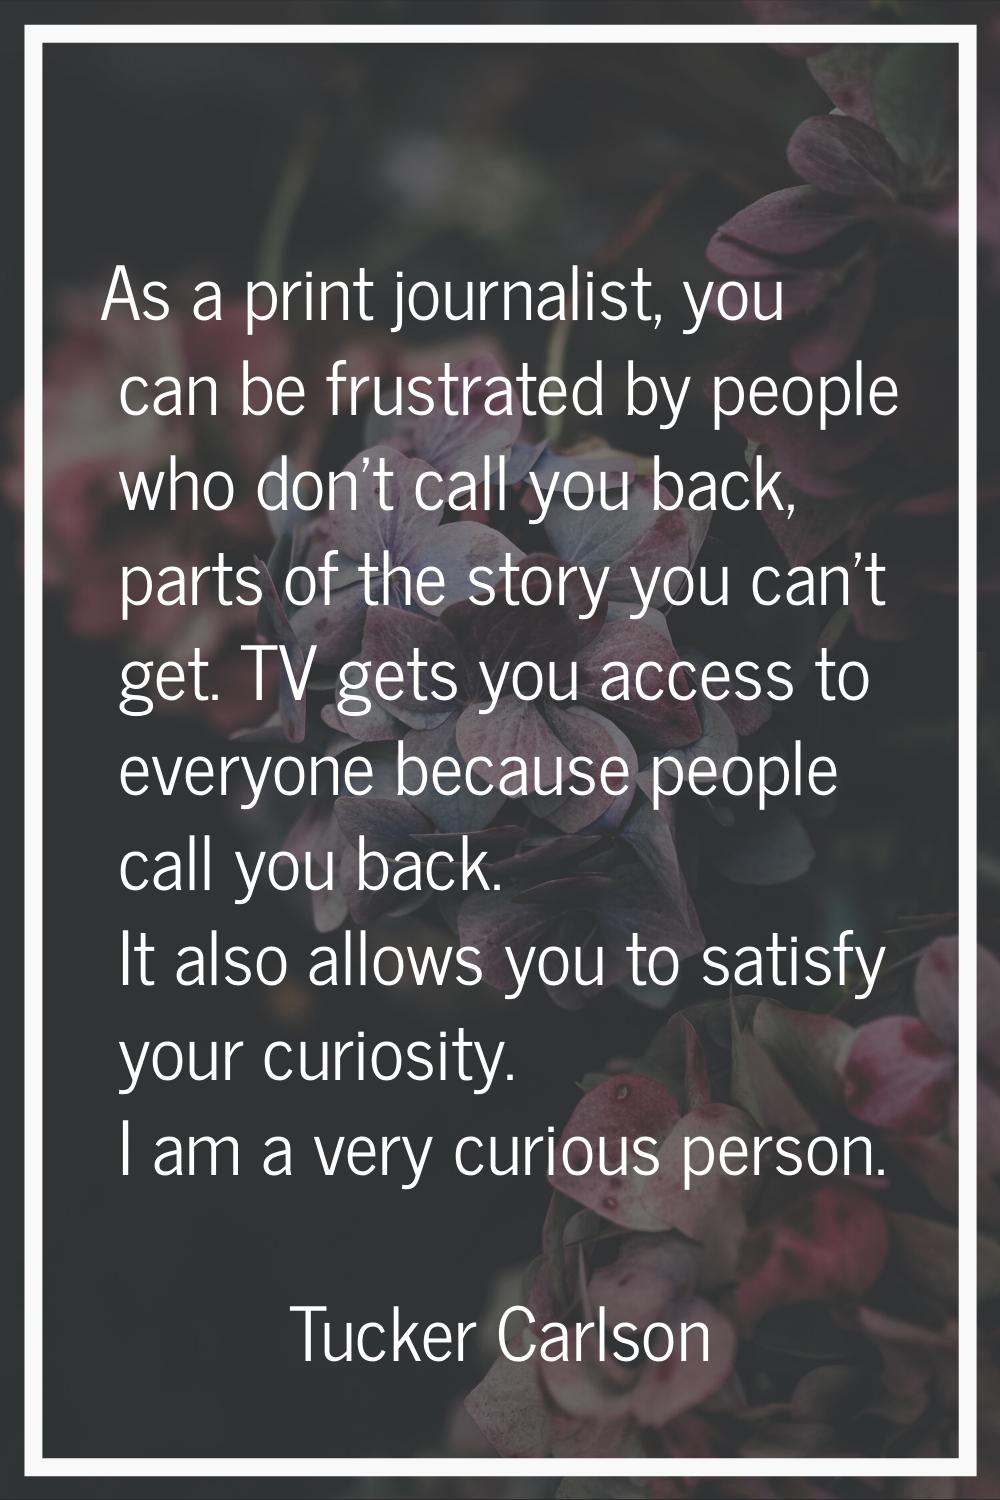 As a print journalist, you can be frustrated by people who don't call you back, parts of the story 